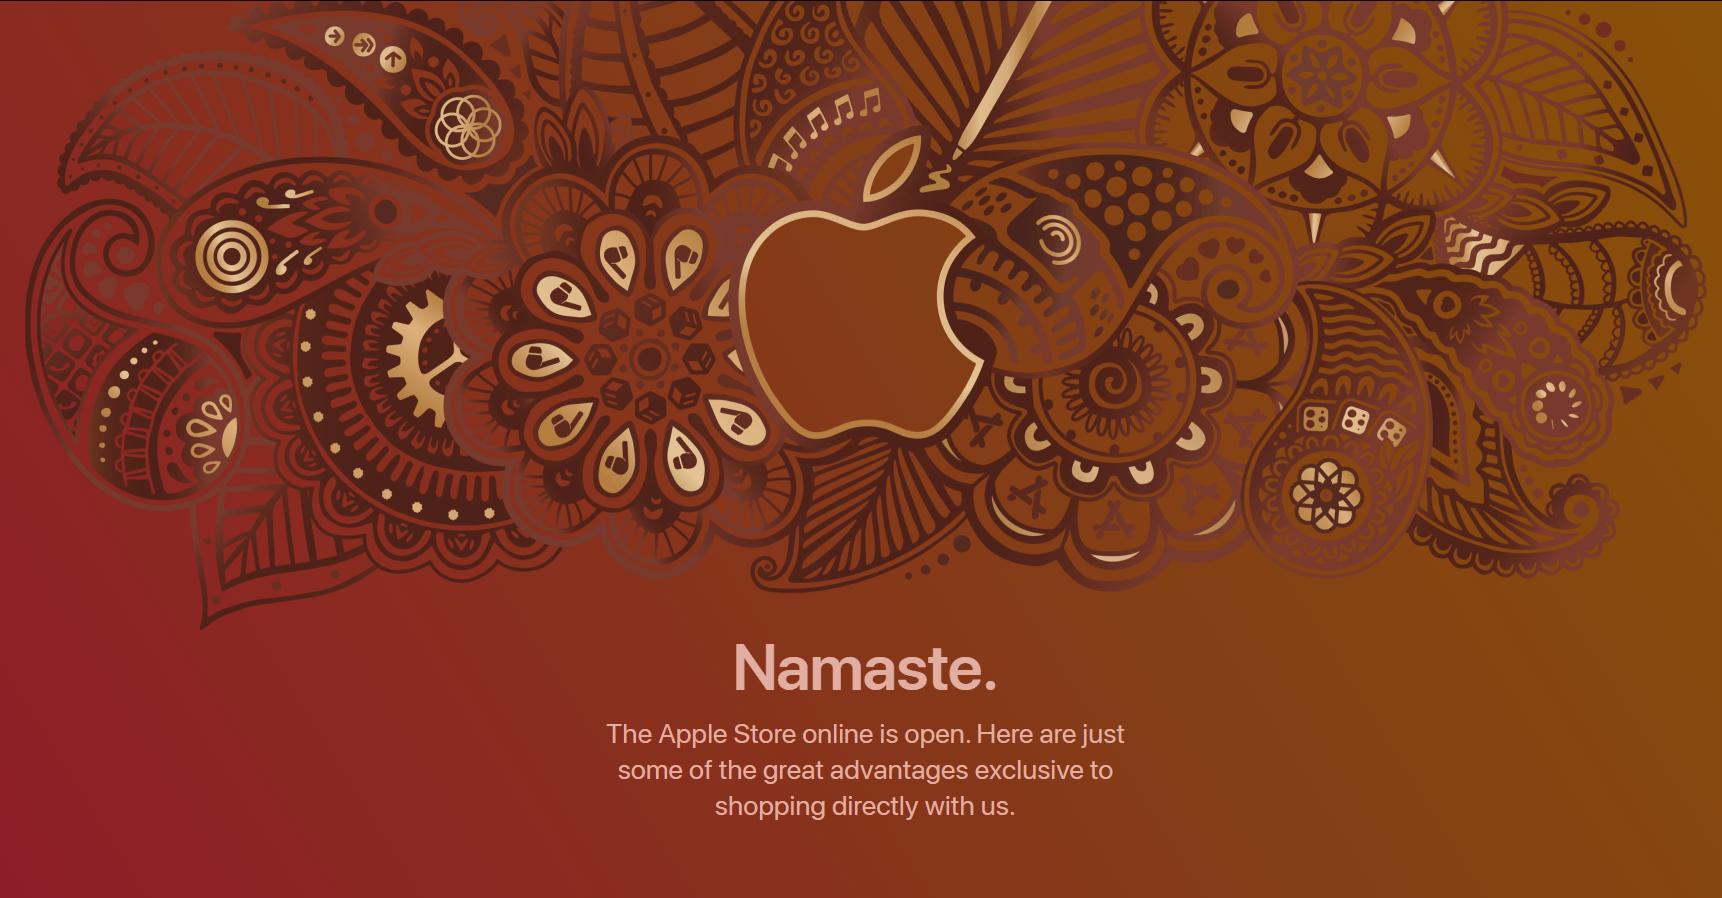 Apple Store online in India